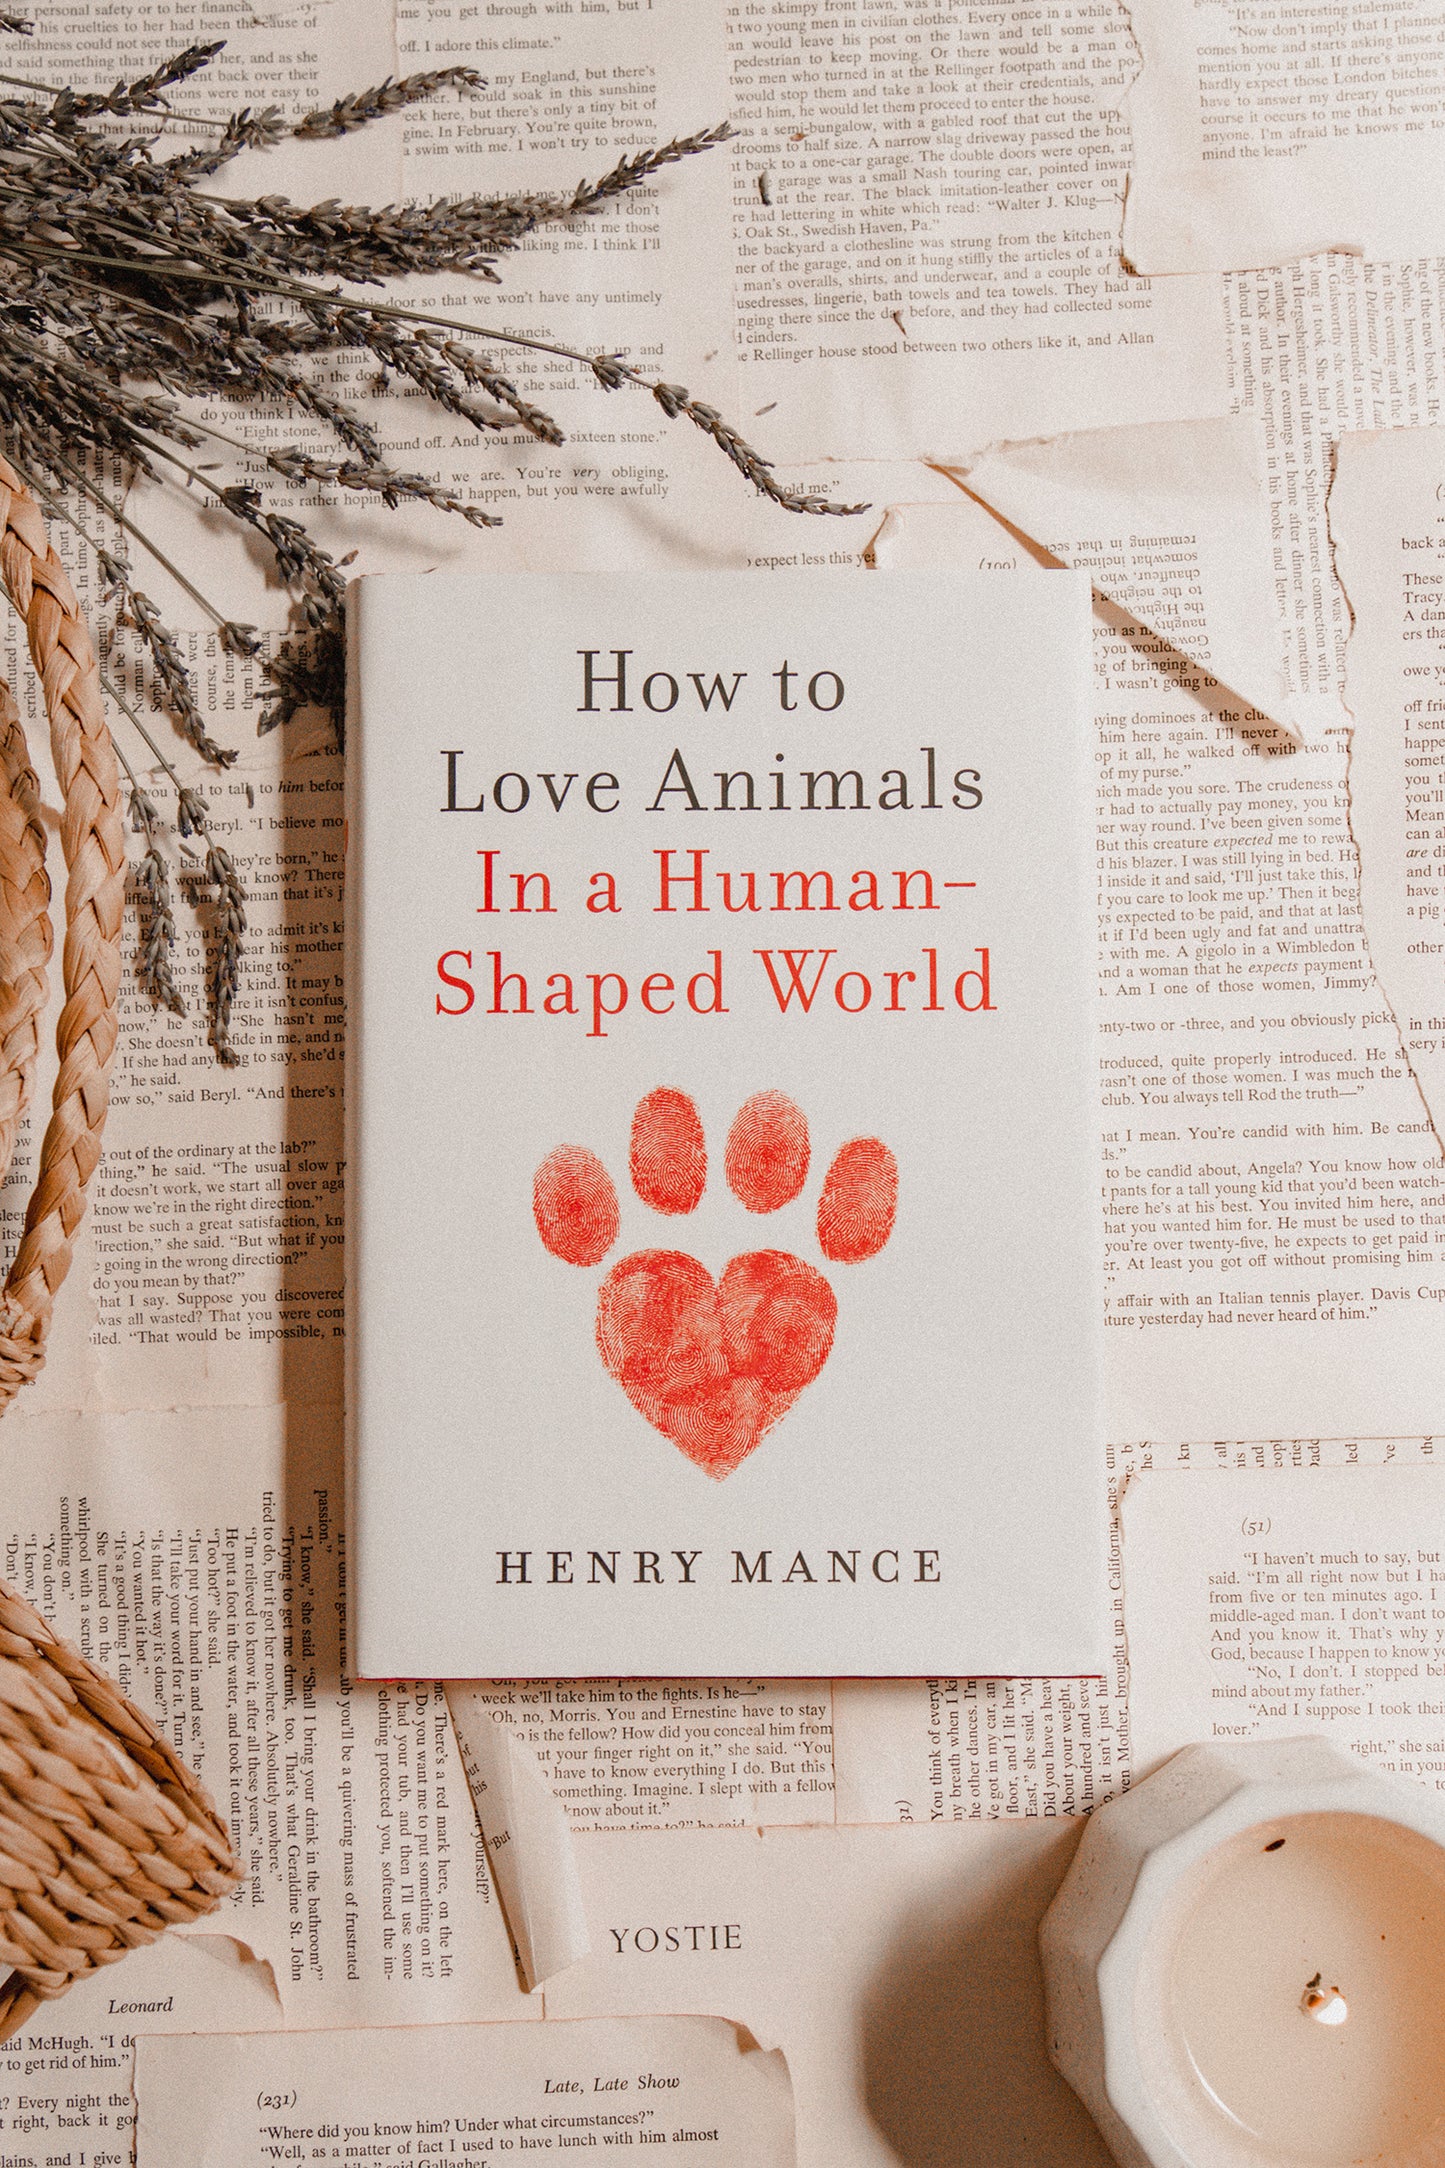 How to Love Animals in a Human-Shaped World by Henry Mance